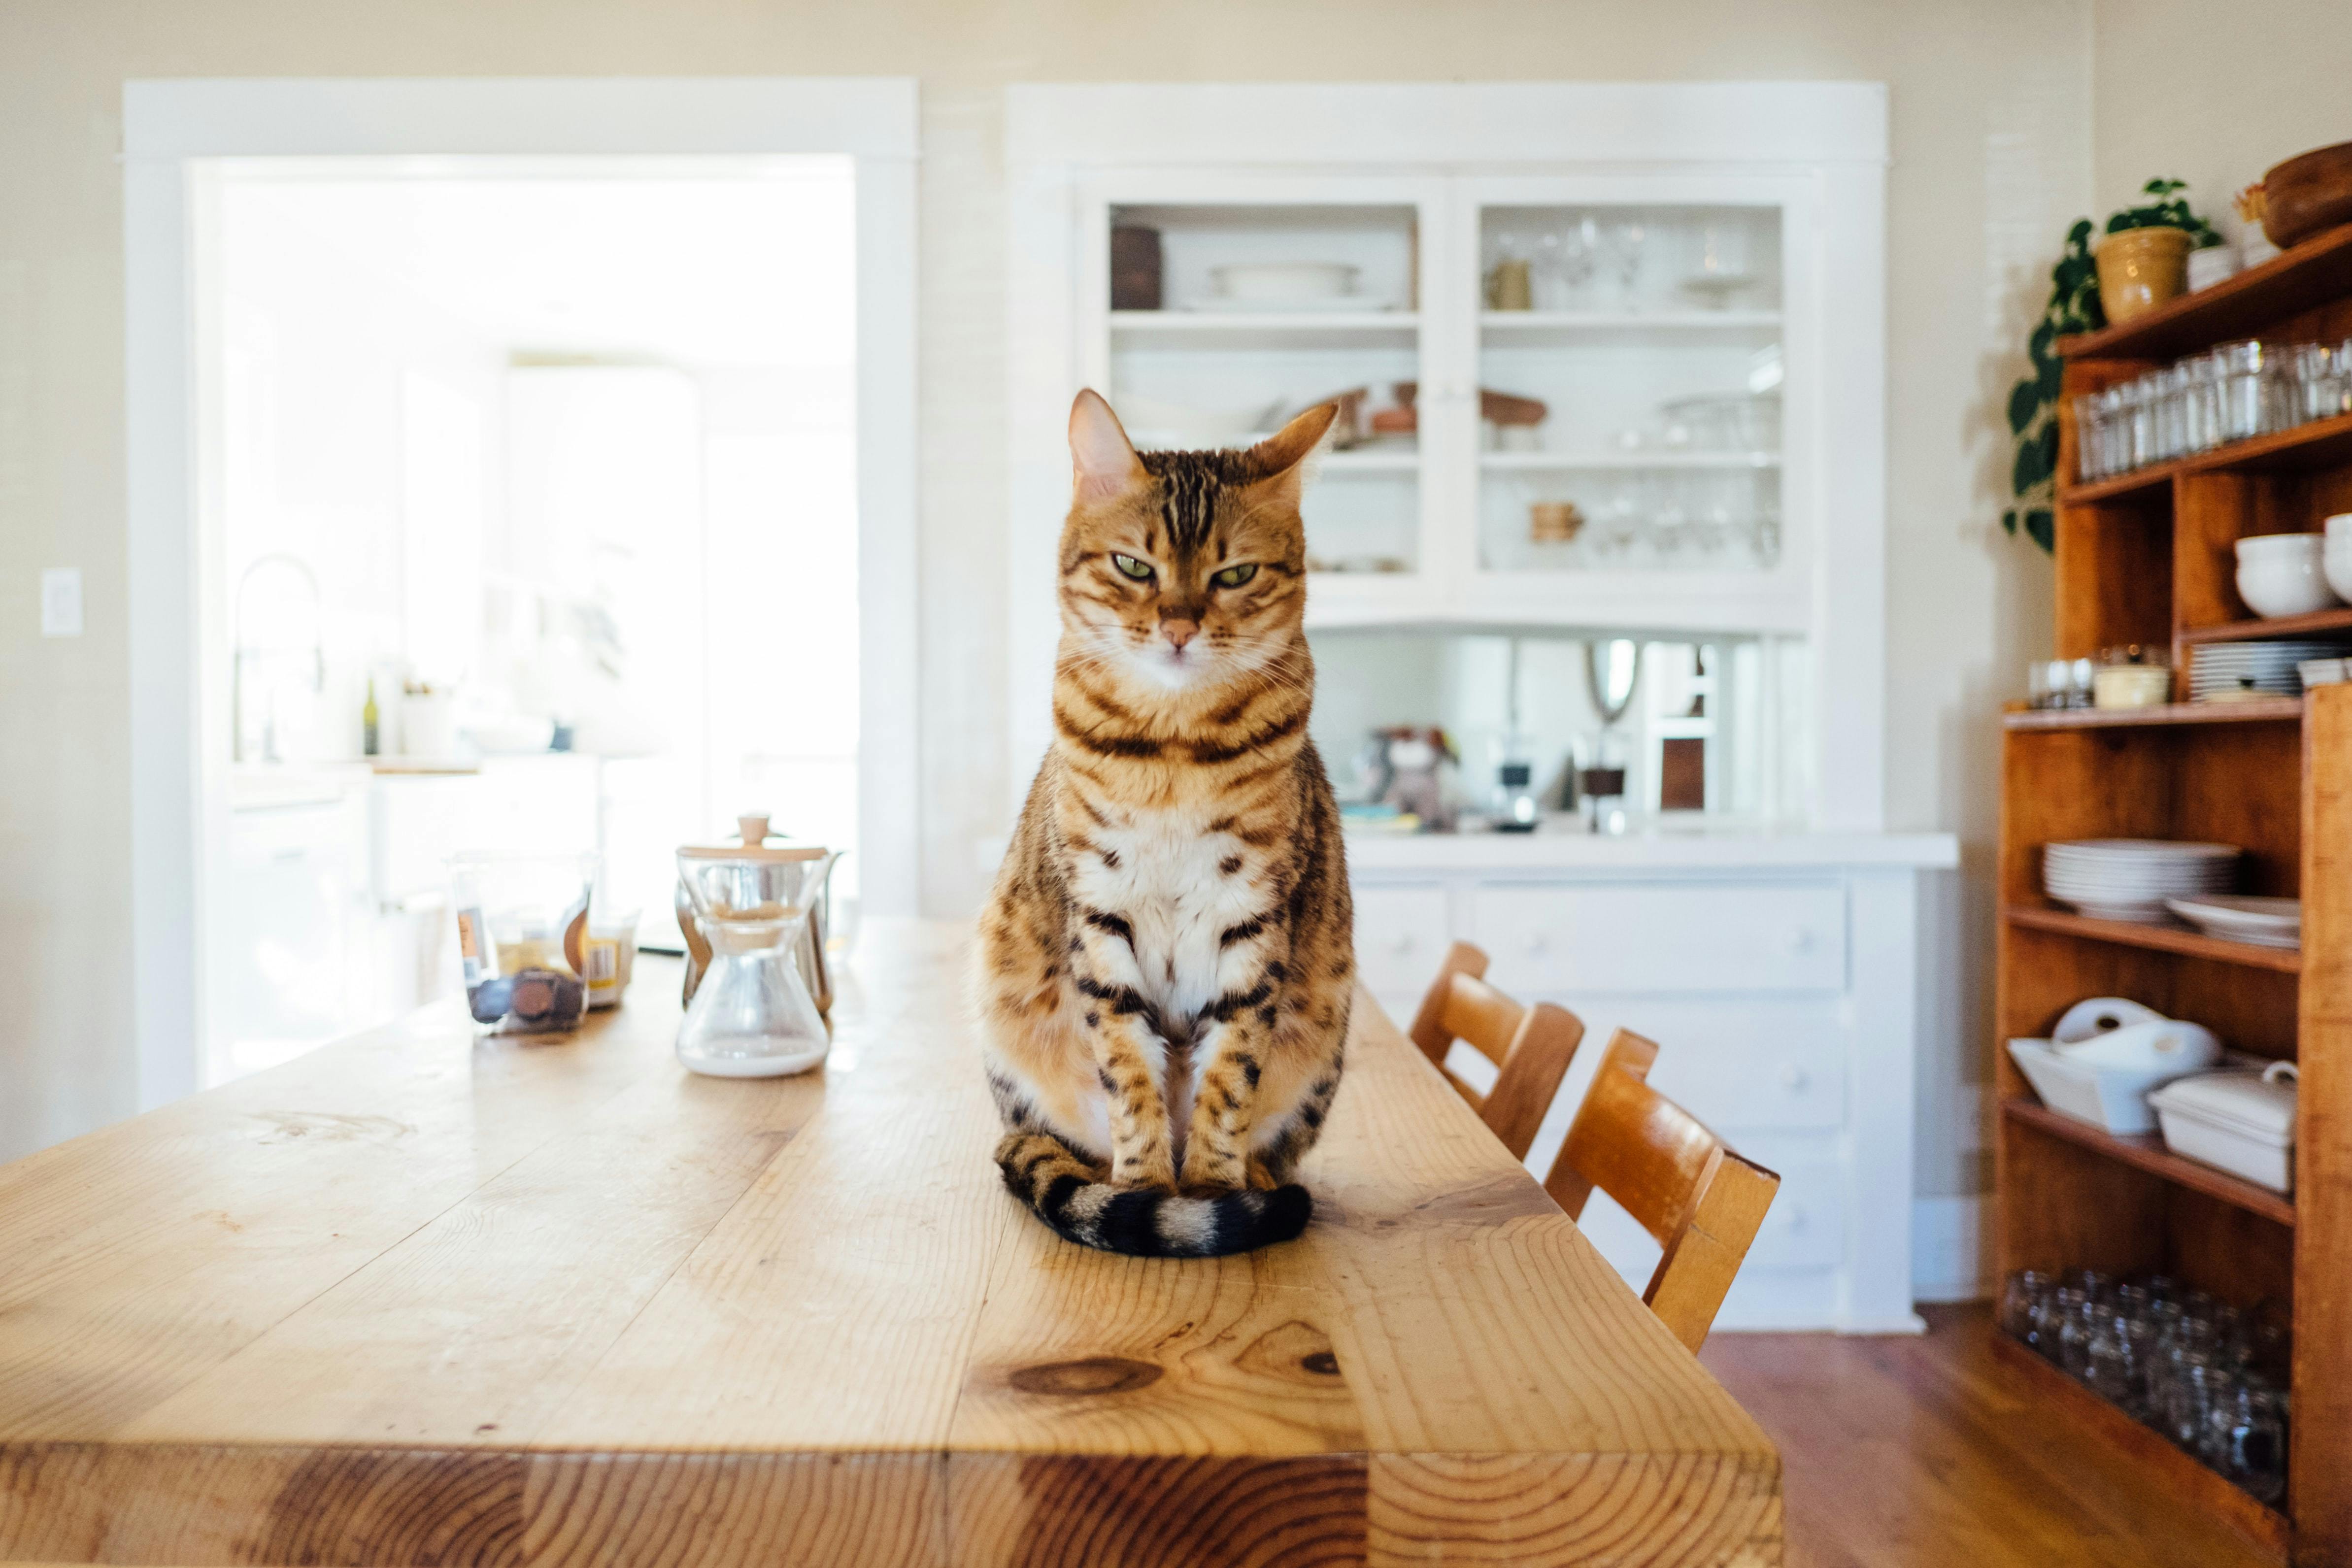 Tabby cat sitting on a dining room table